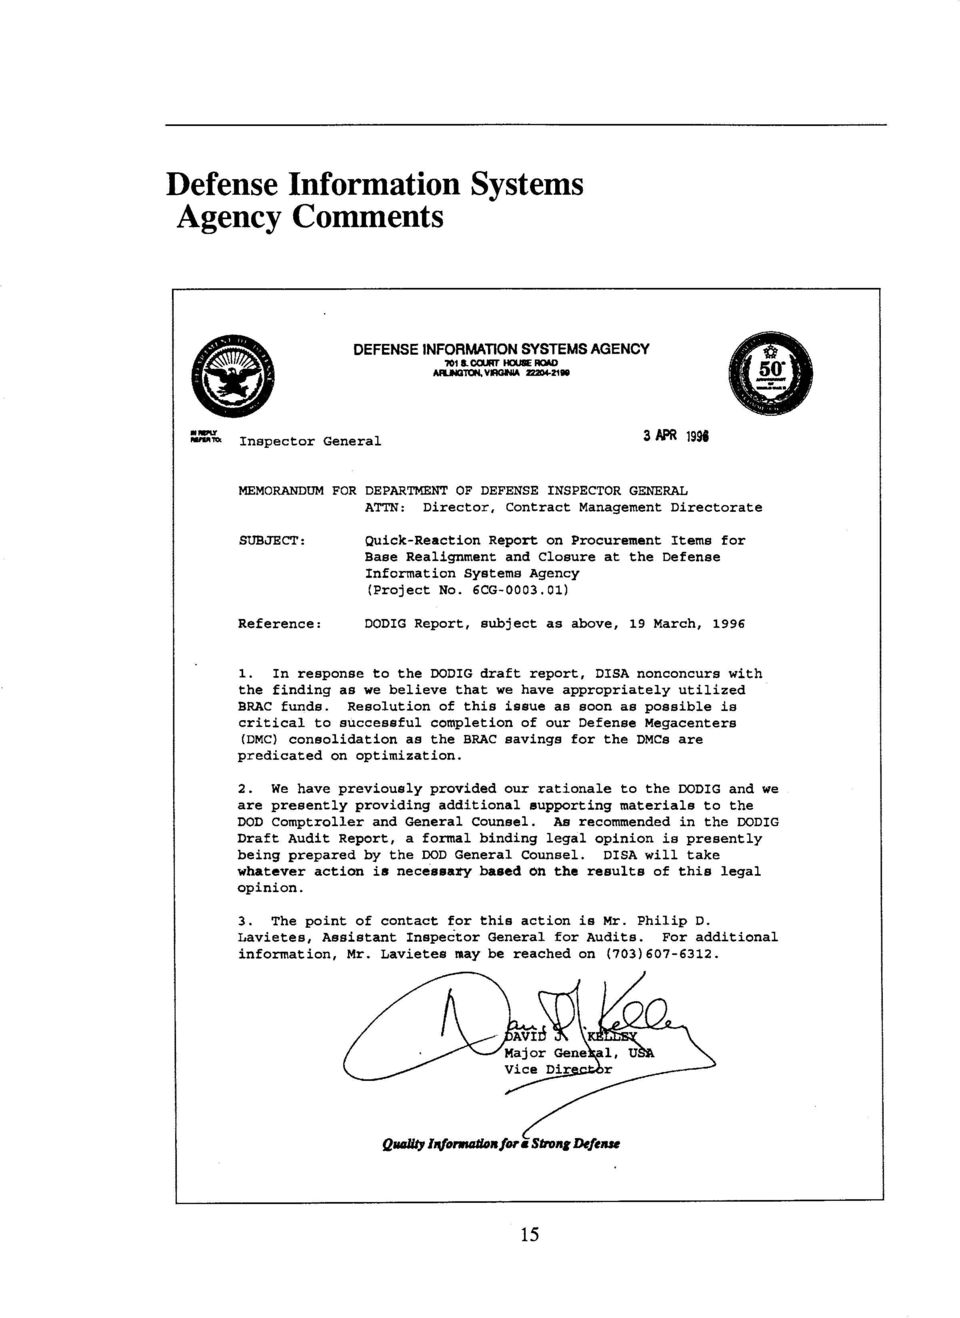 Defense Information Systems Agency (Project No. 6CG-0003.0l) Reference: DODIG Report, subject as above, 19 March, 1996 1.